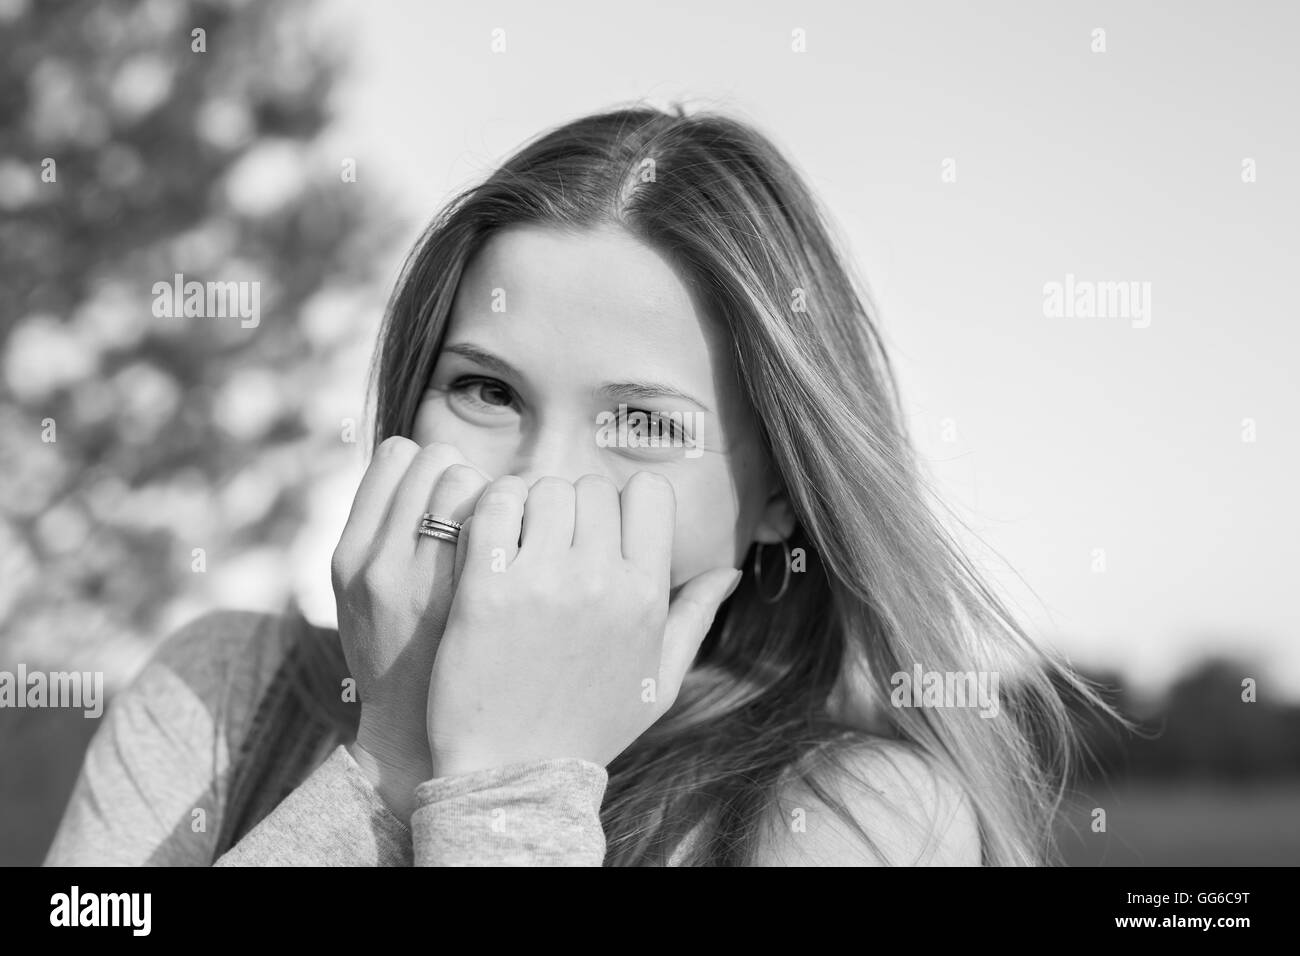 Surprised young woman with hands over her mouth outdoor Stock Photo